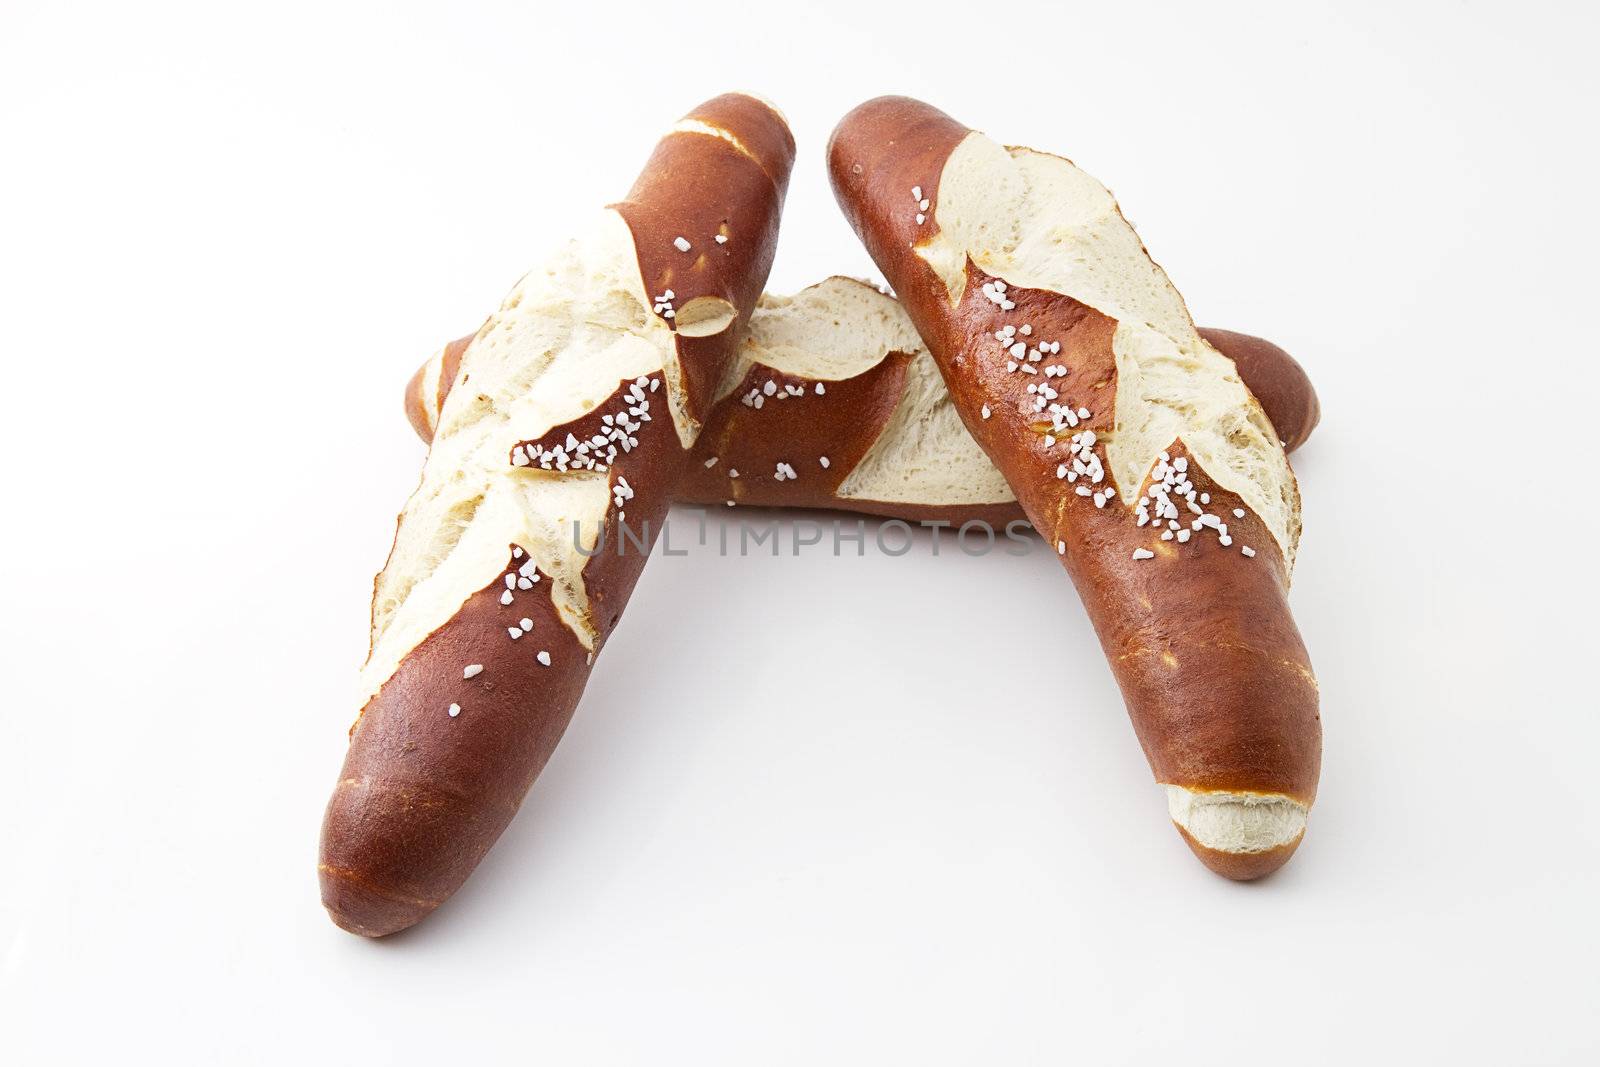 three items of some sort of pretzels on white background